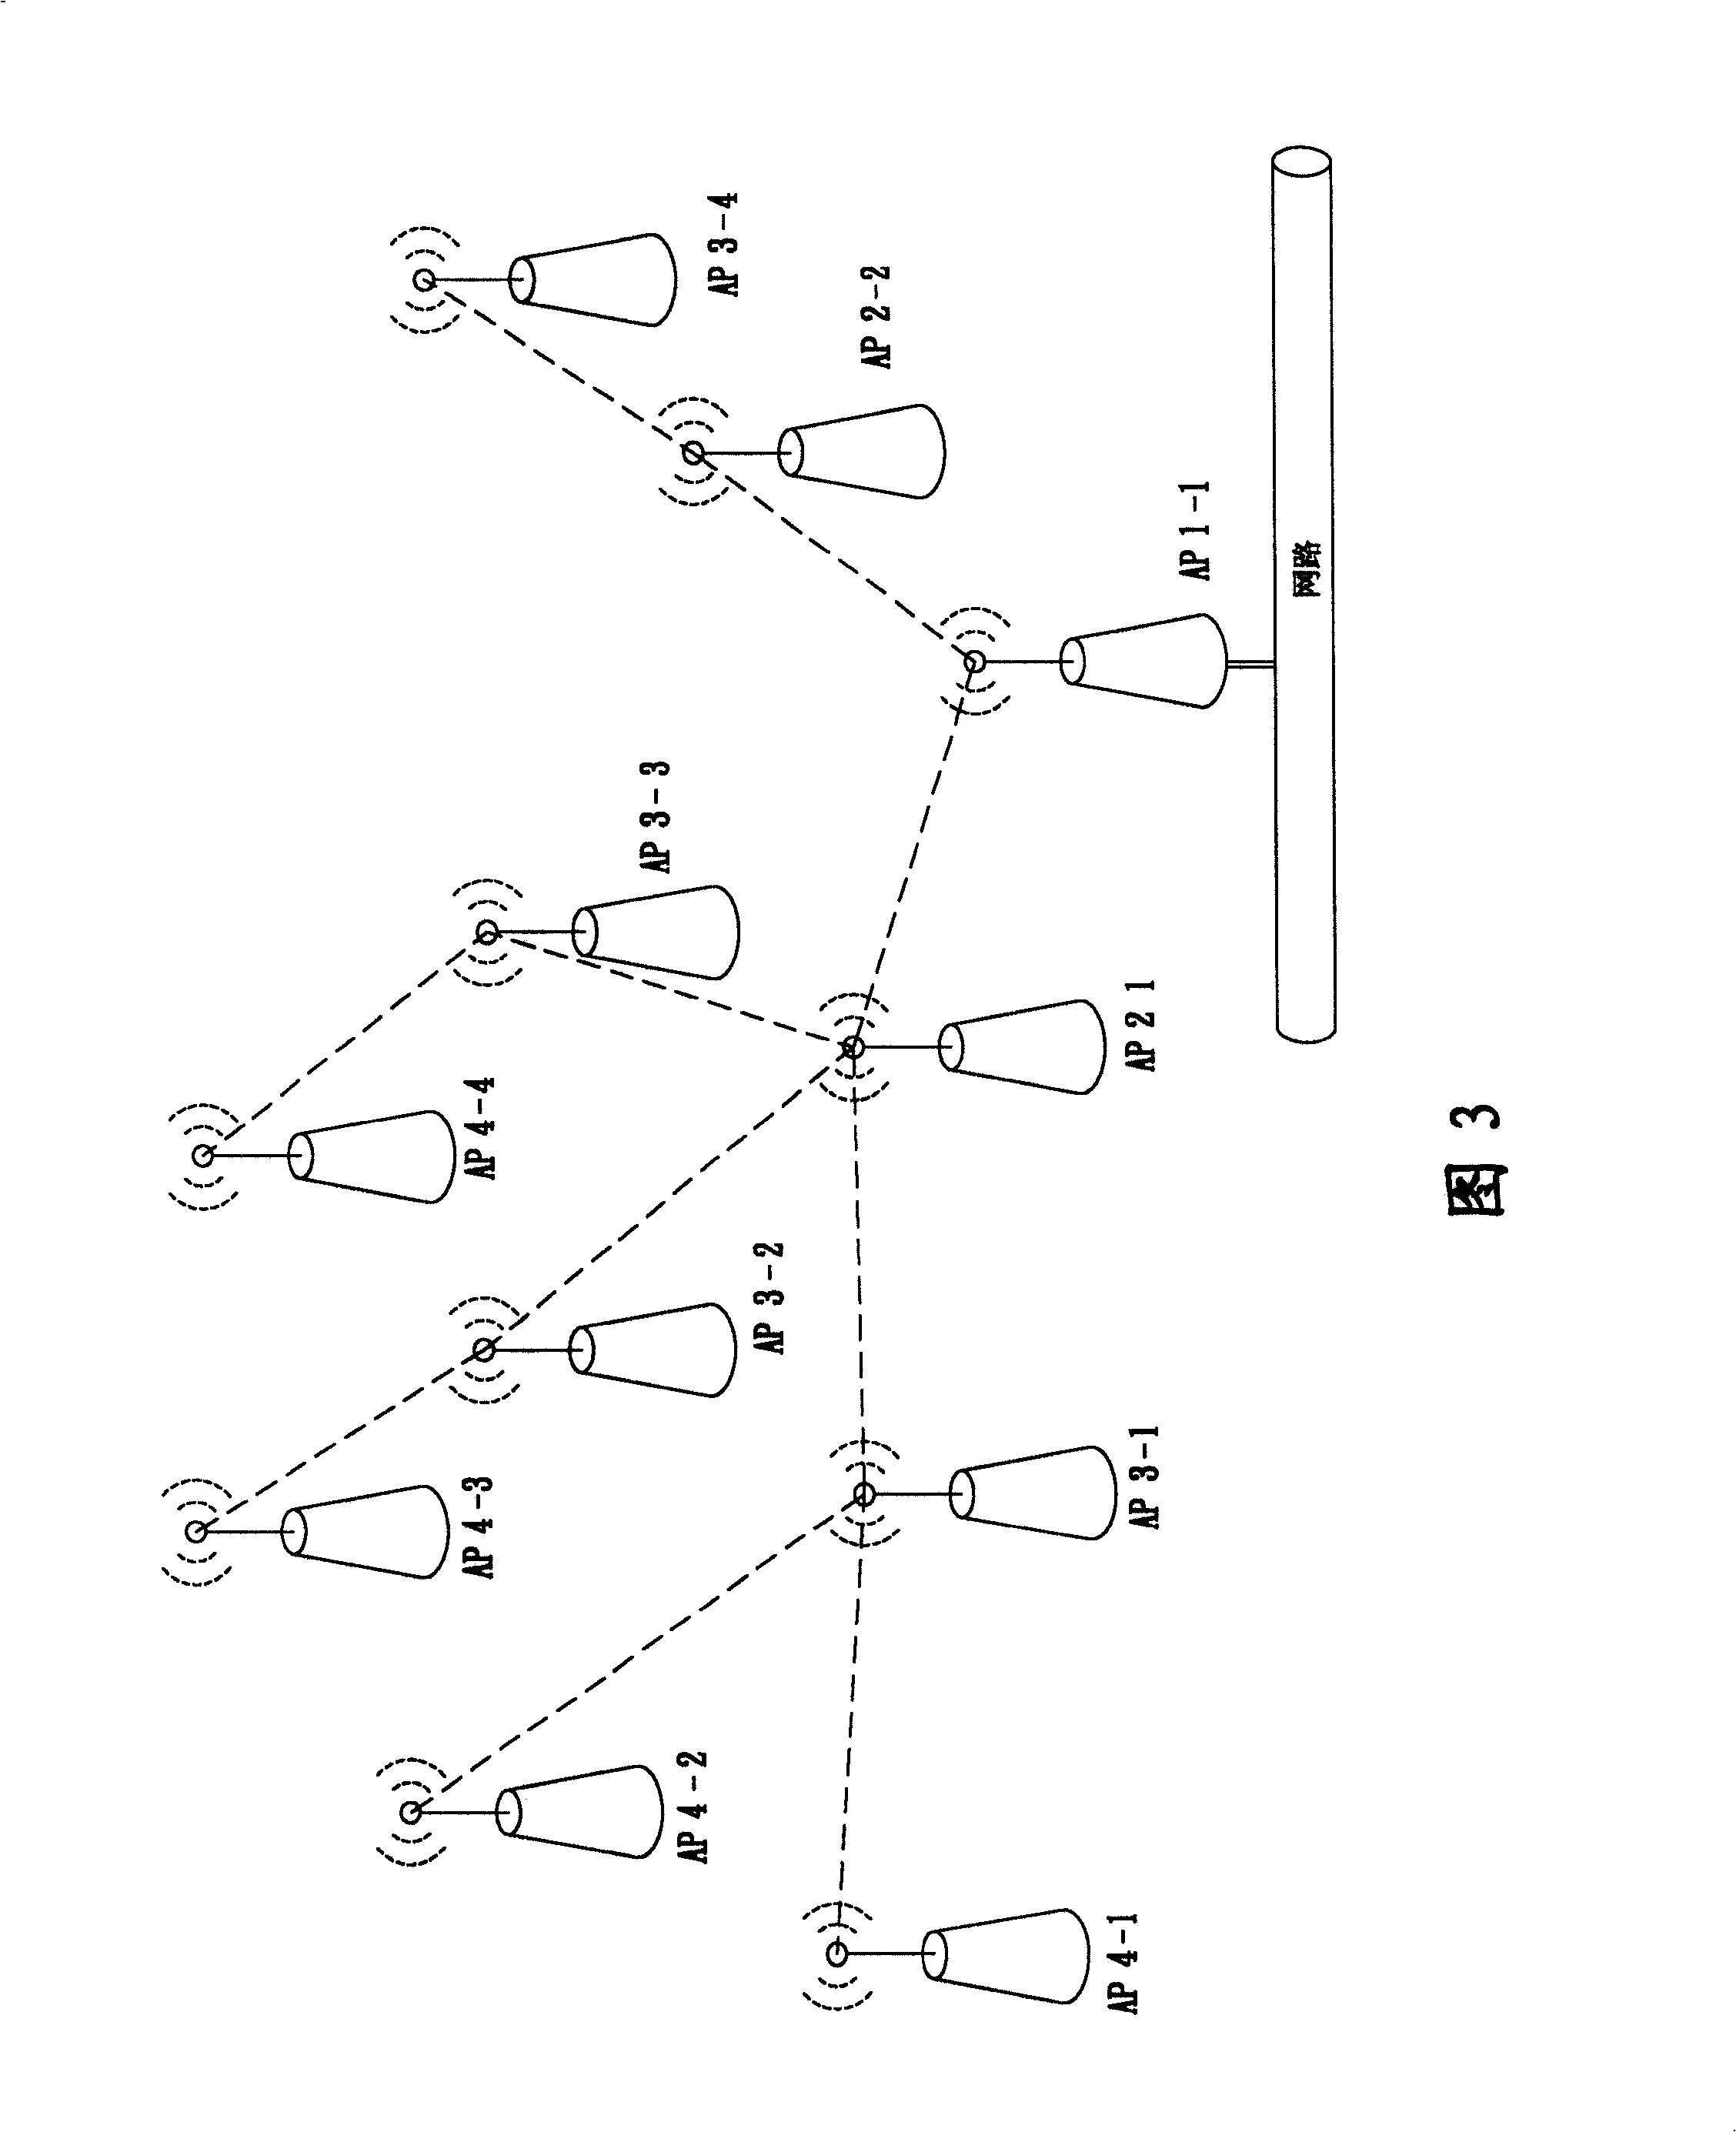 Dynamic wireless network topological system providing load balance and flux control pipe